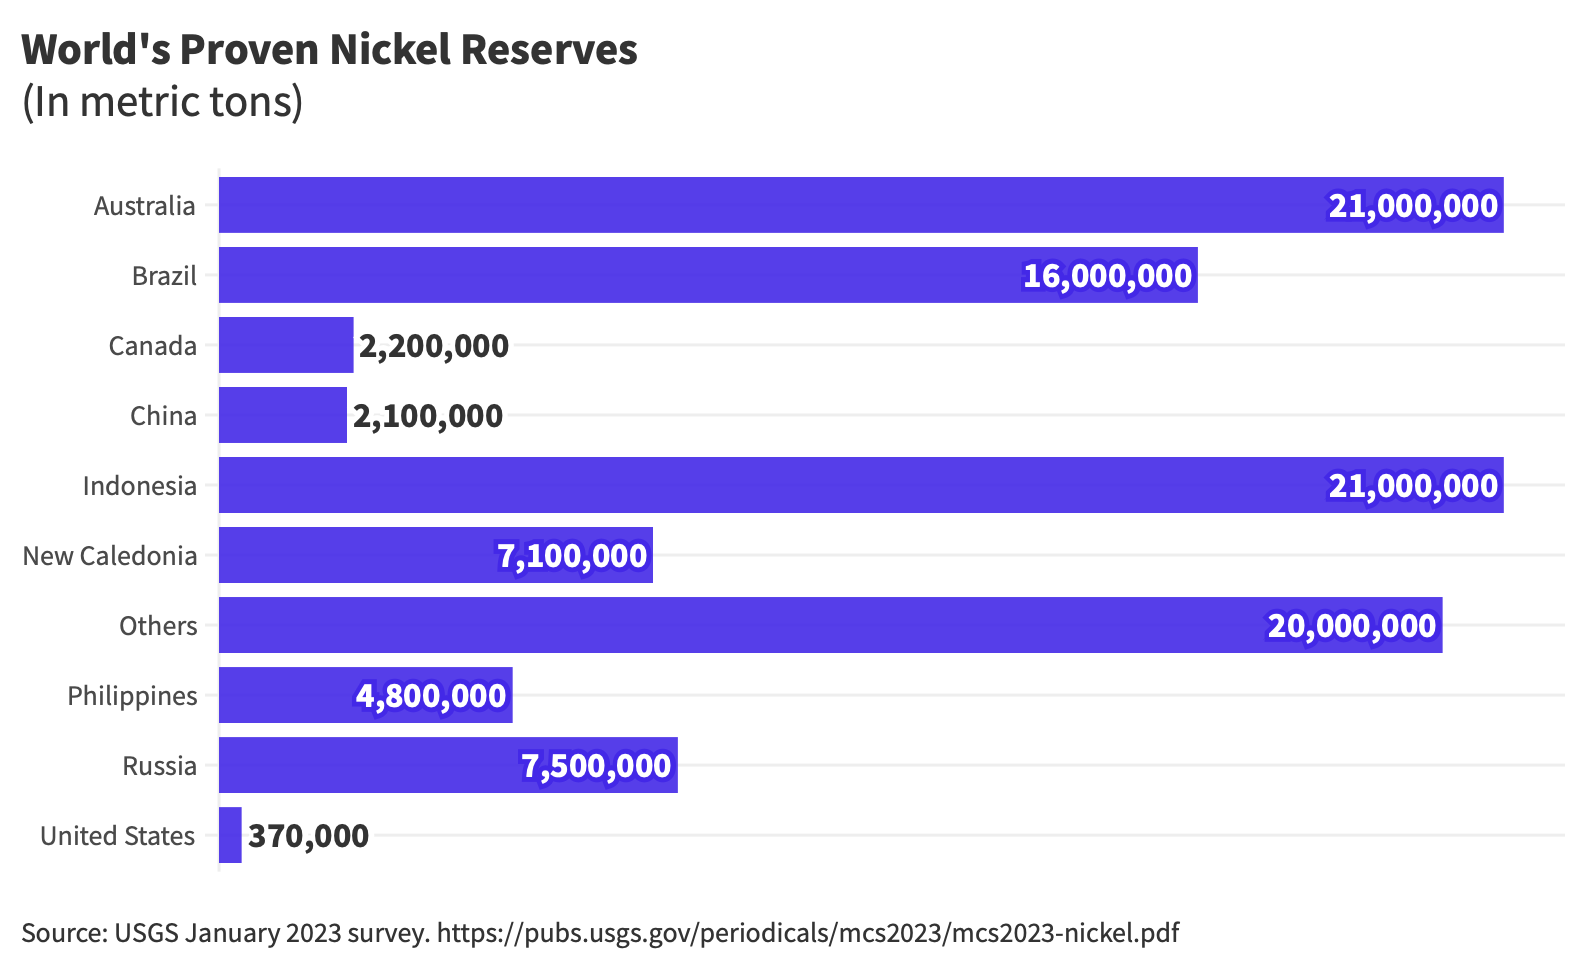 Chinese companies operating in Indonesia have become the dominant supplier of nickel, a metal critical for EV battery production